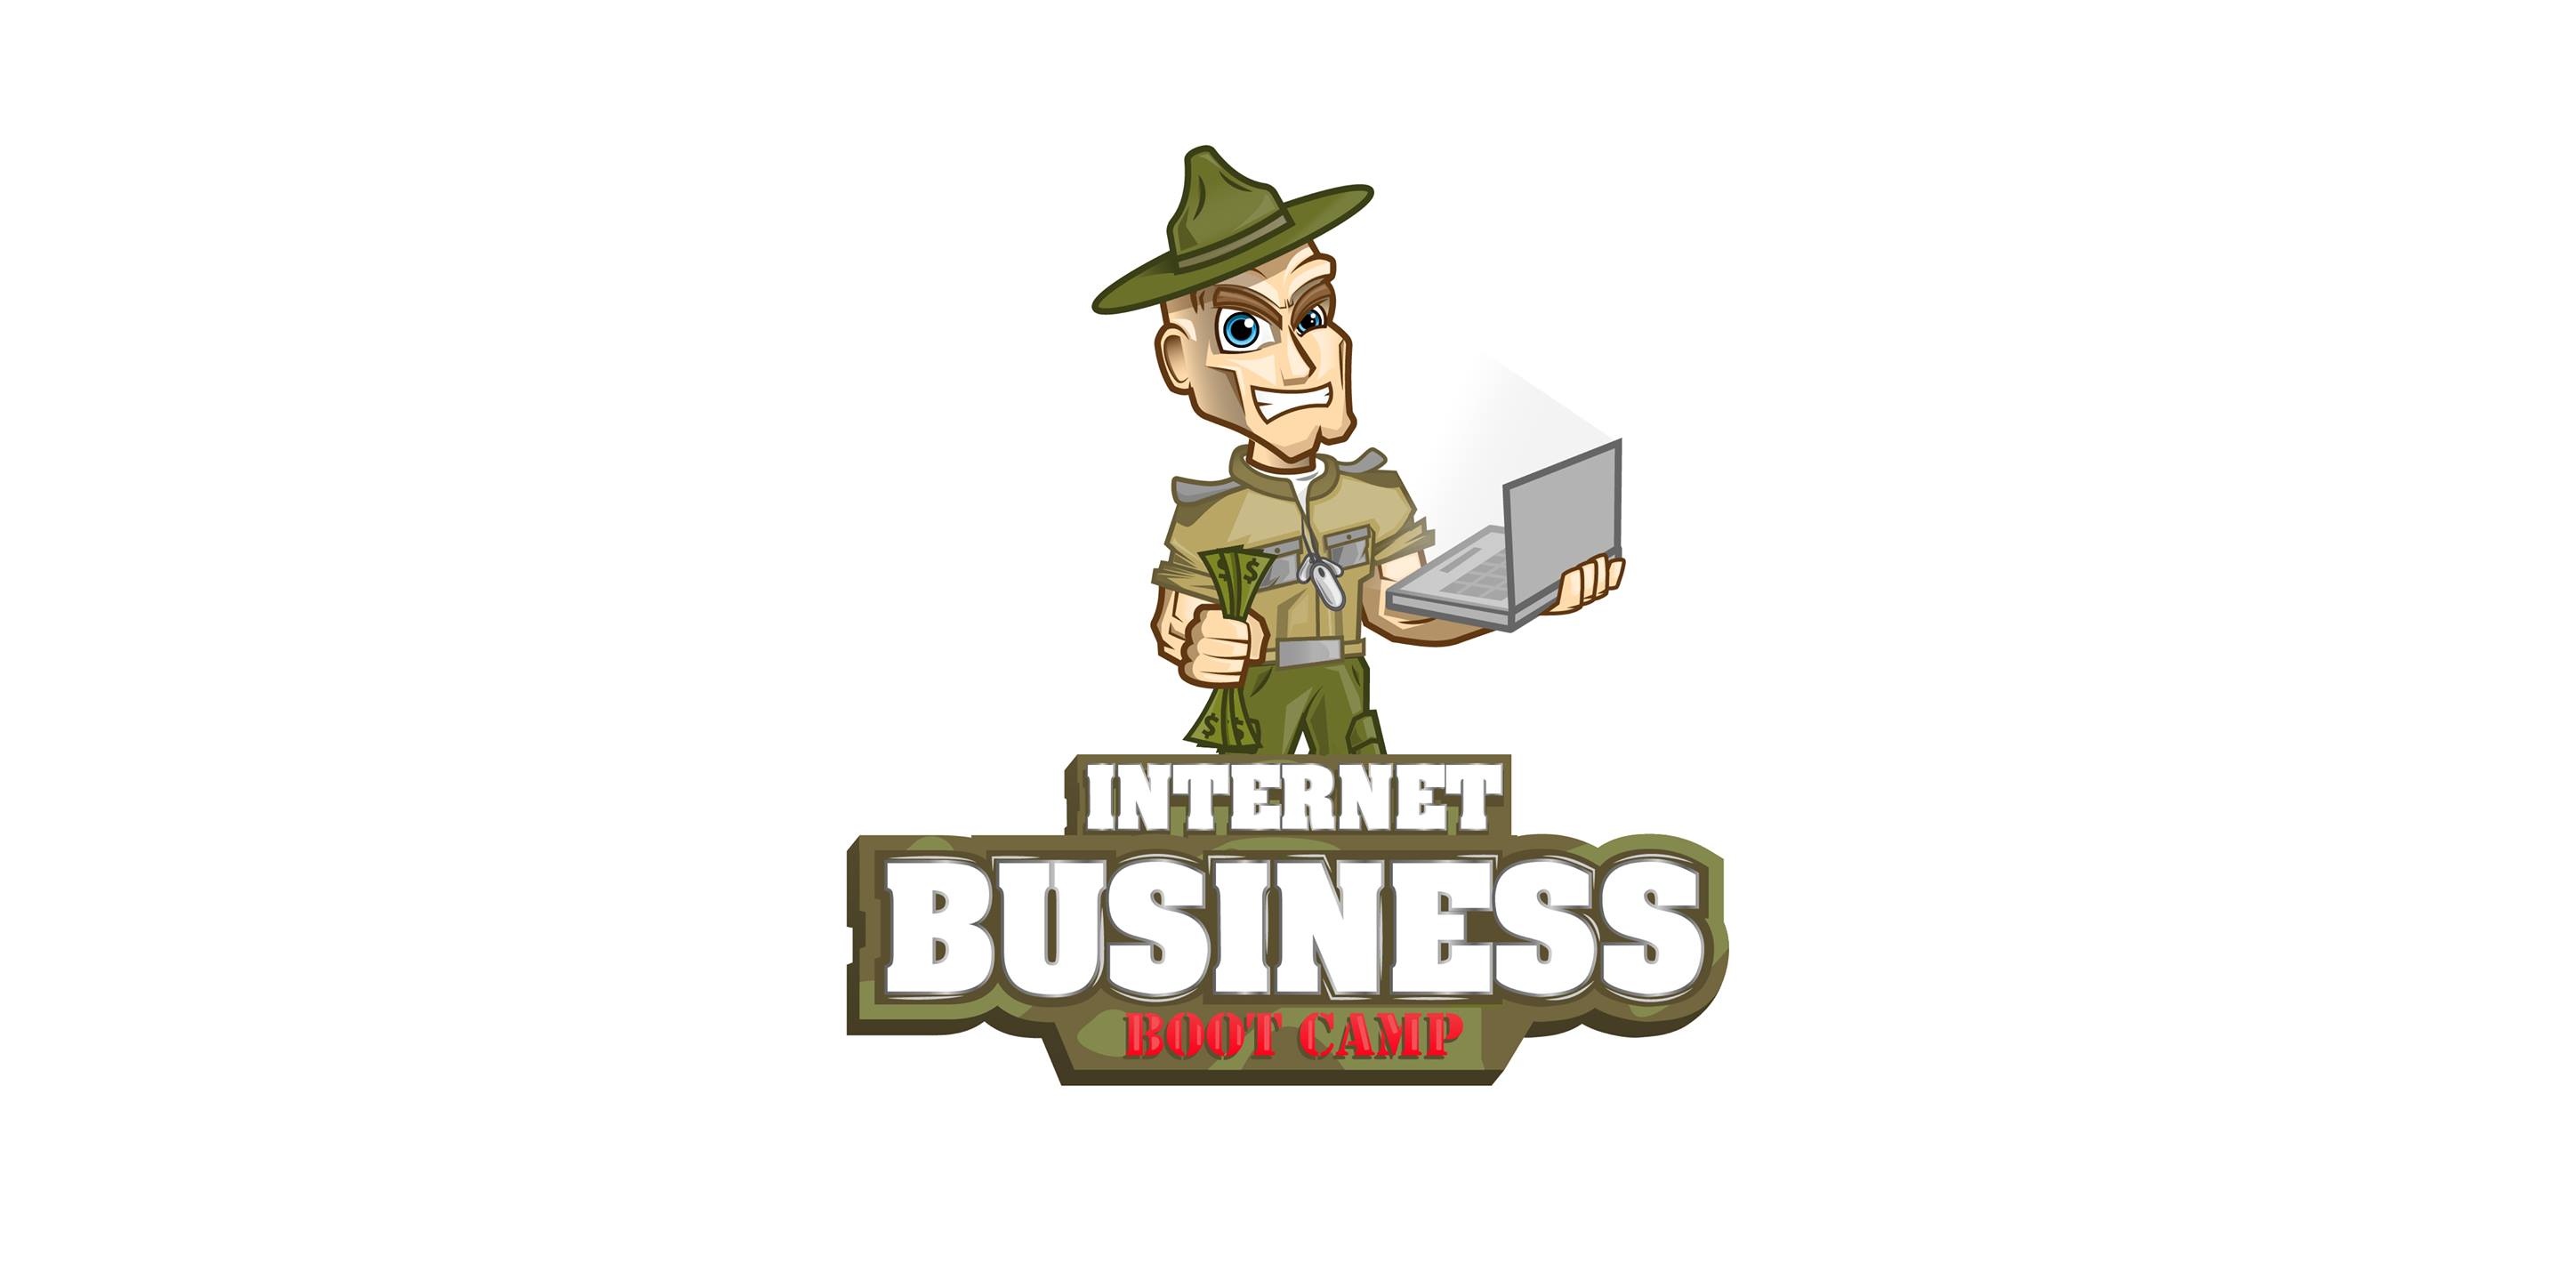 Company logo of Internet Business Boot Camp